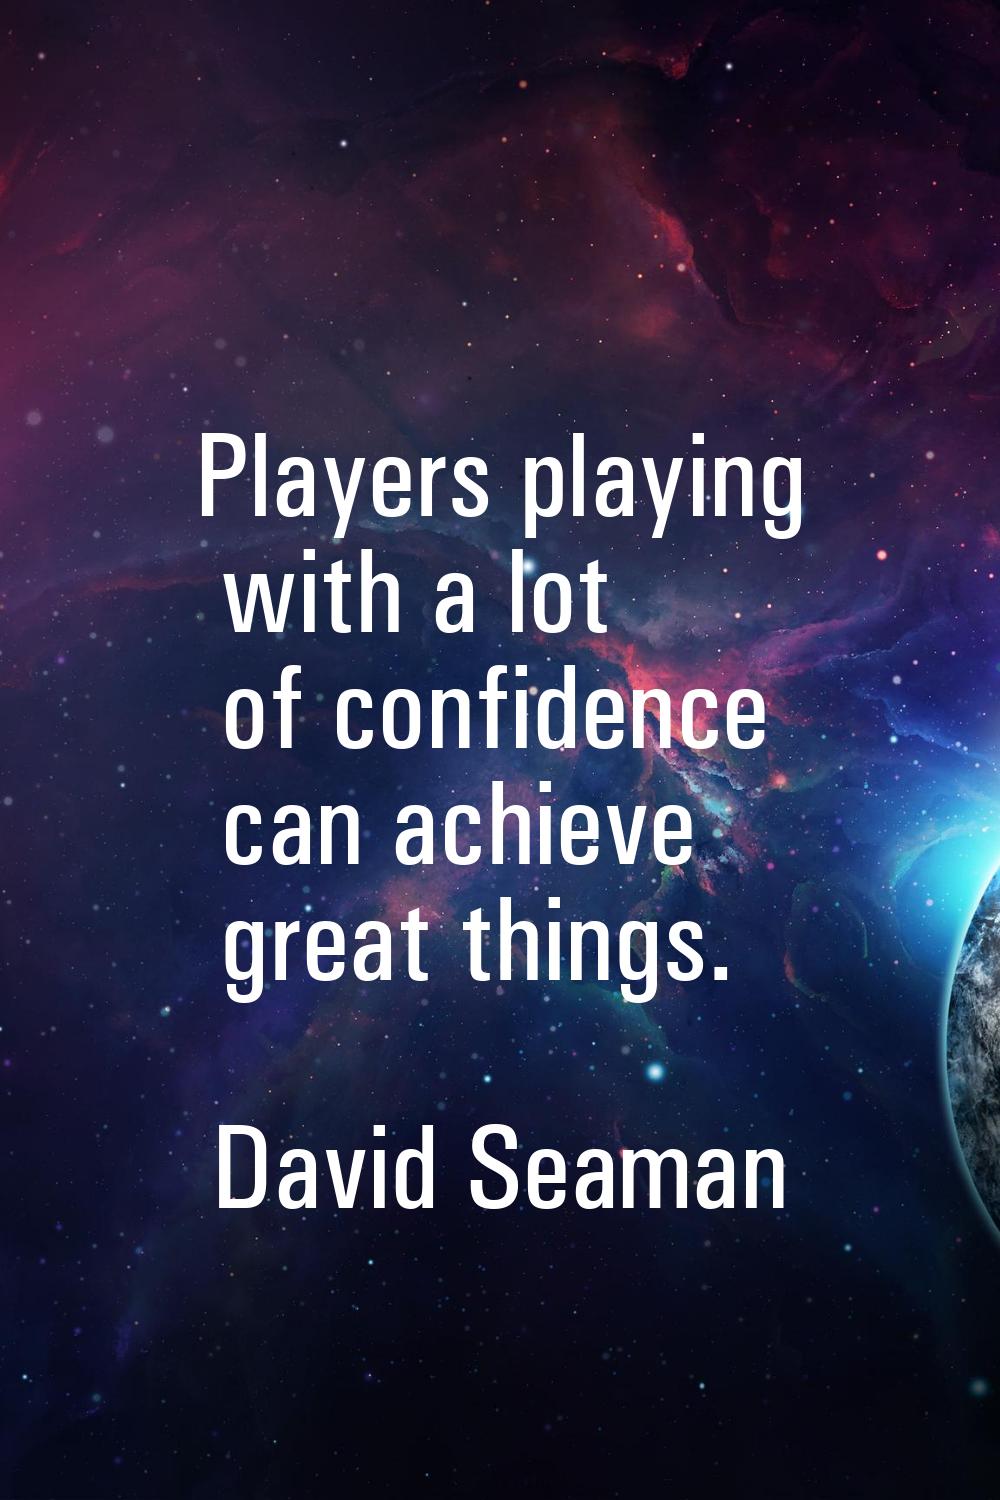 Players playing with a lot of confidence can achieve great things.